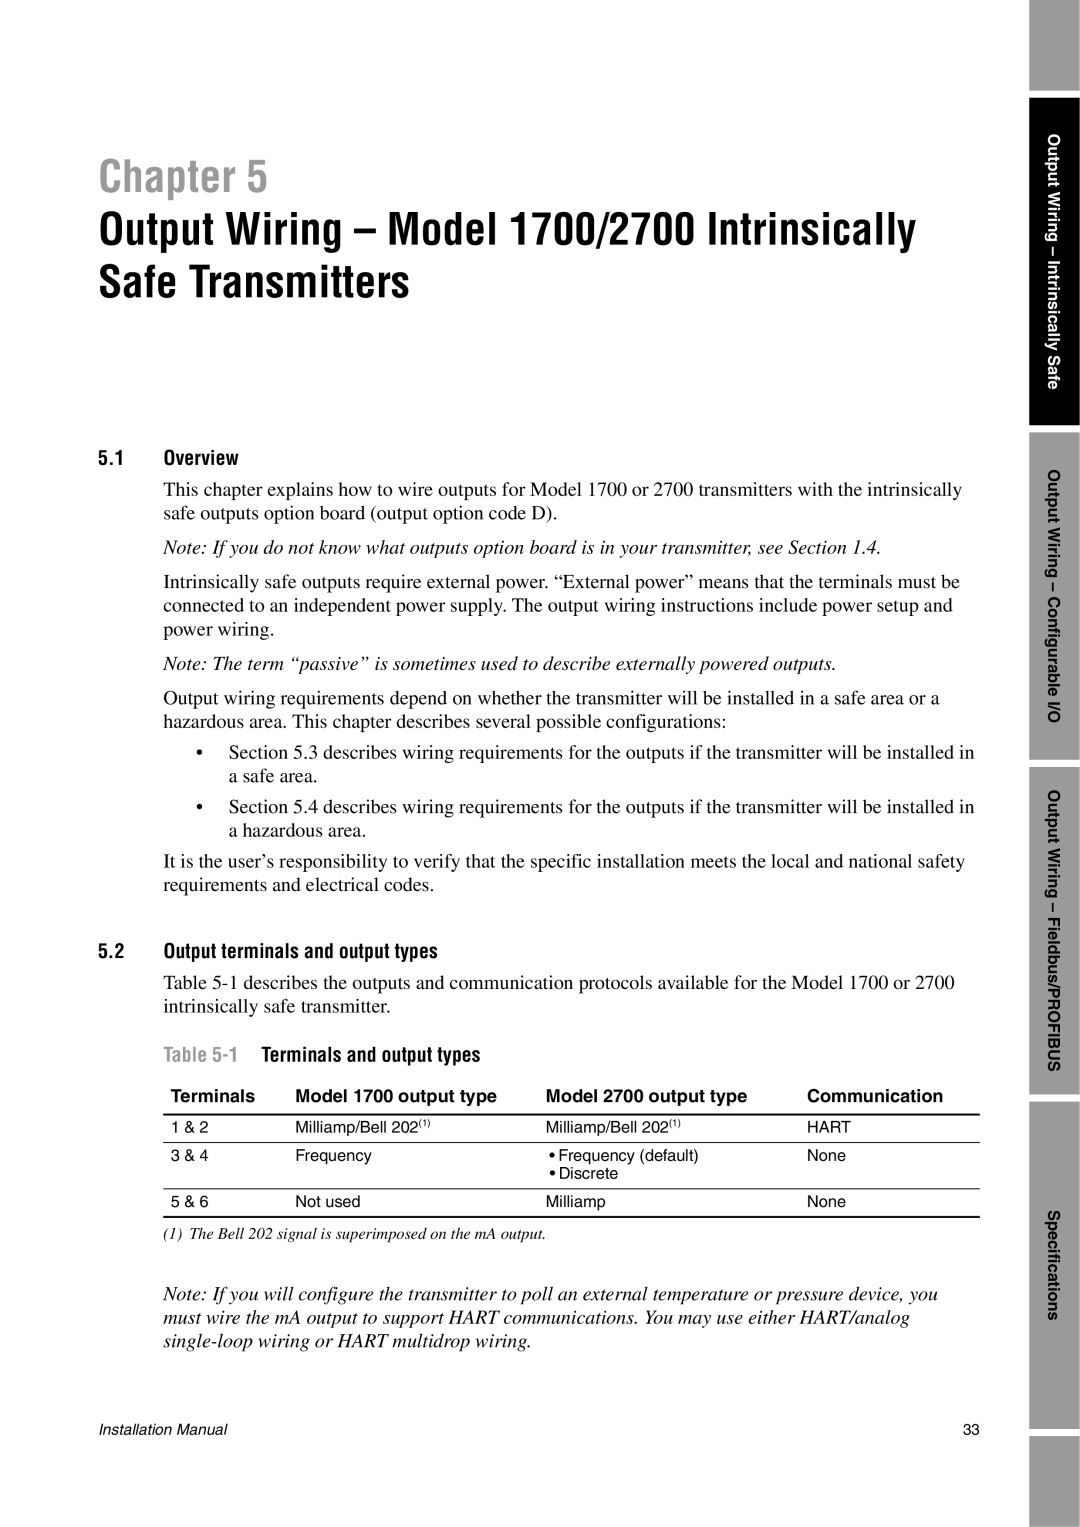 Emerson installation manual Output Wiring - Model 1700/2700 Intrinsically, Safe Transmitters, Chapter, 5.1Overview 